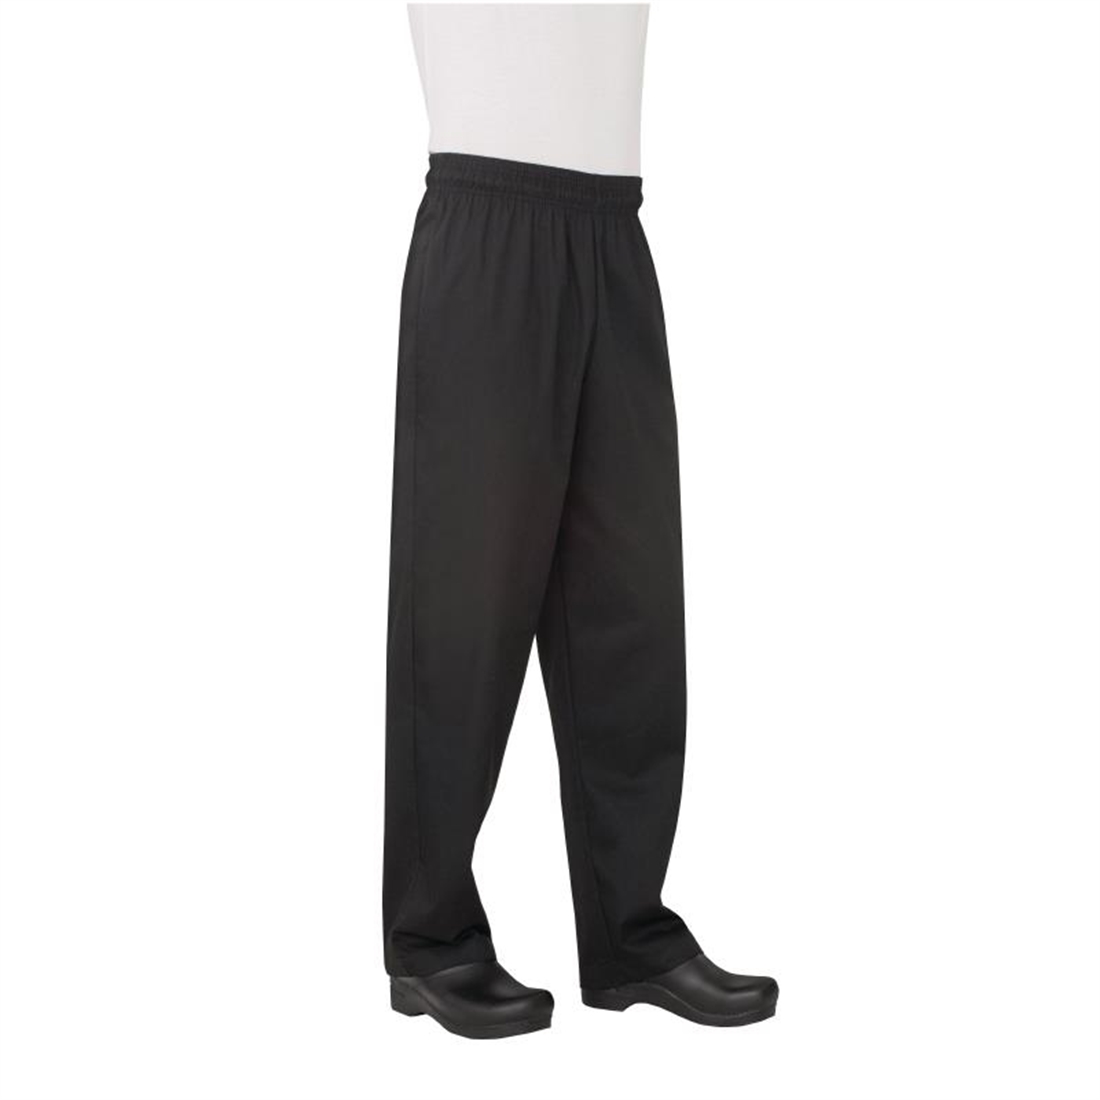 Chef Works Unisex Basic Baggy Chefs Trousers Black 4XL